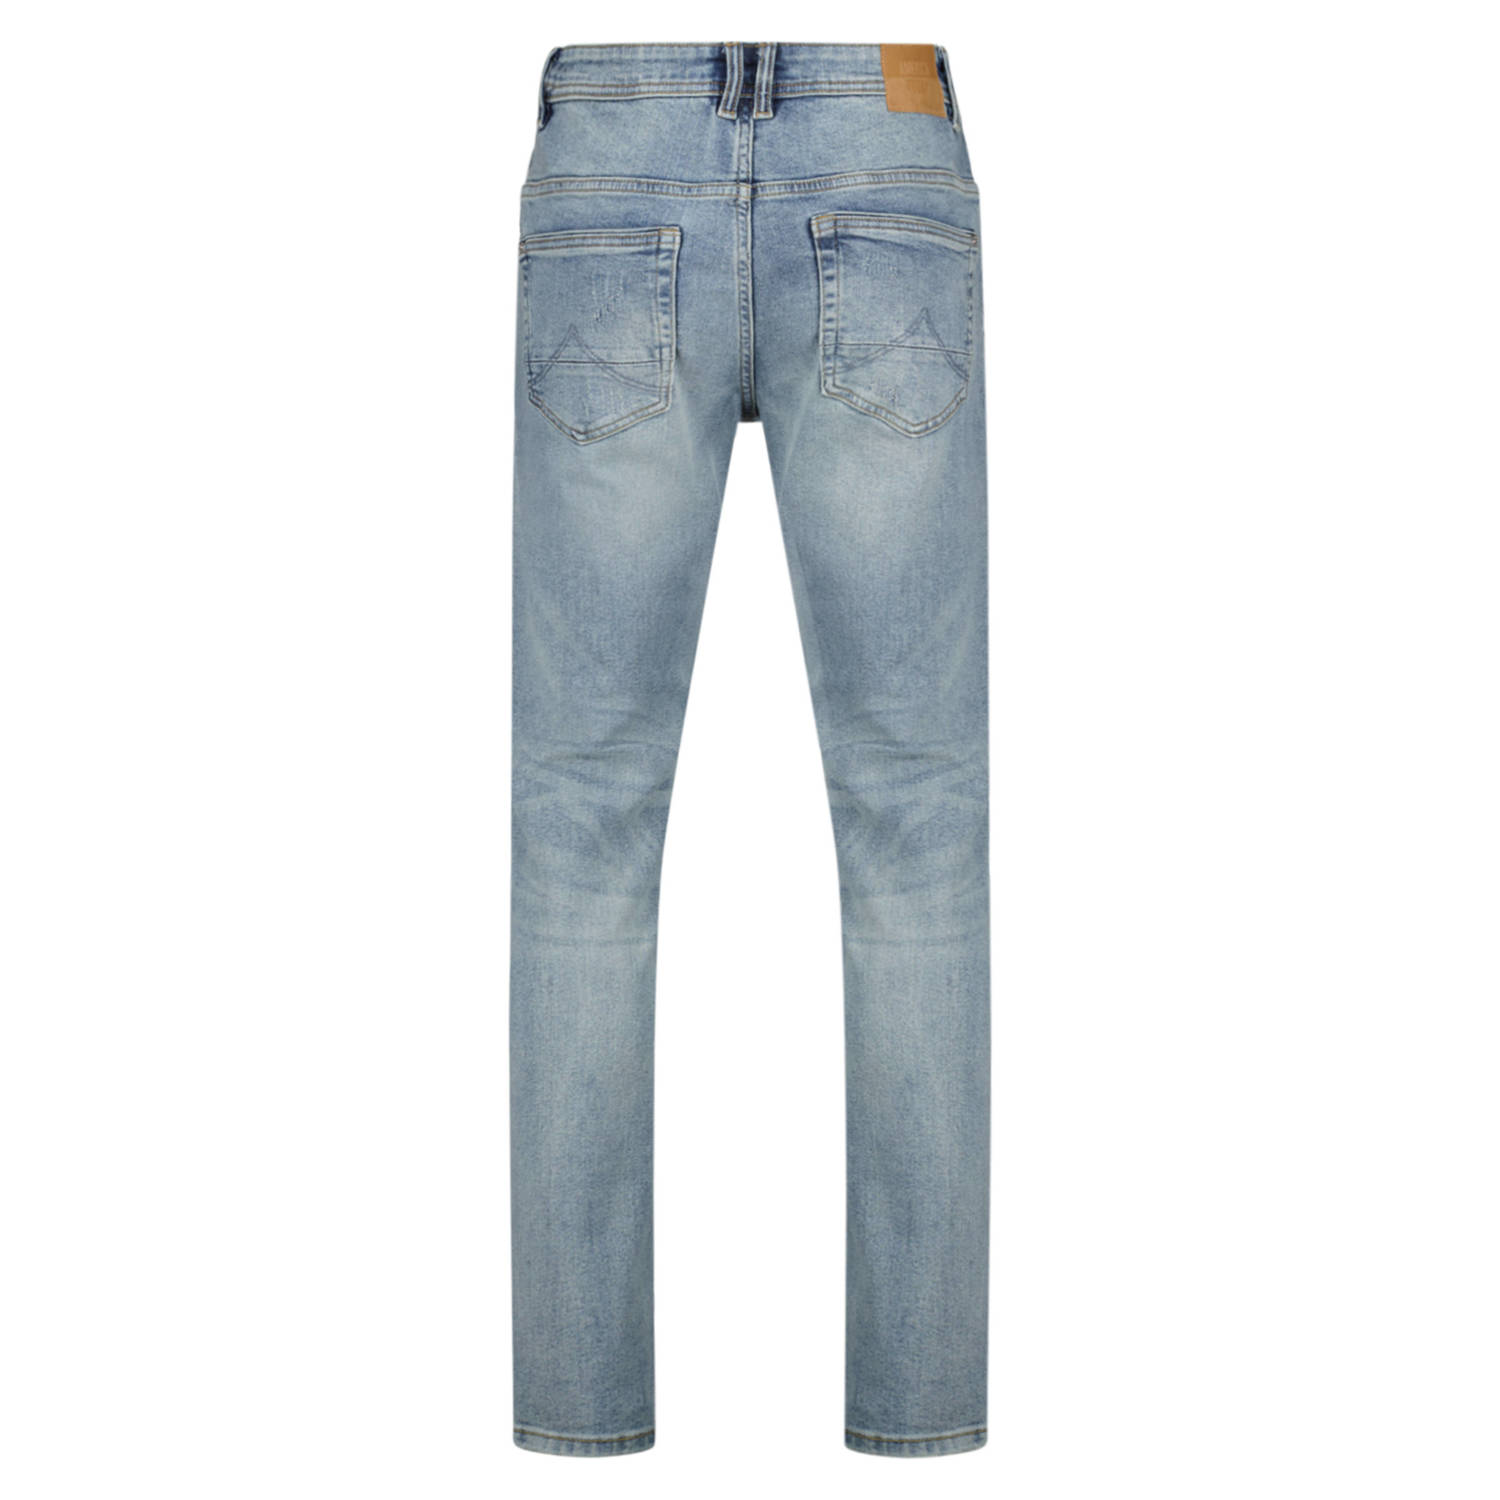 America Today slim fit jeans light blue